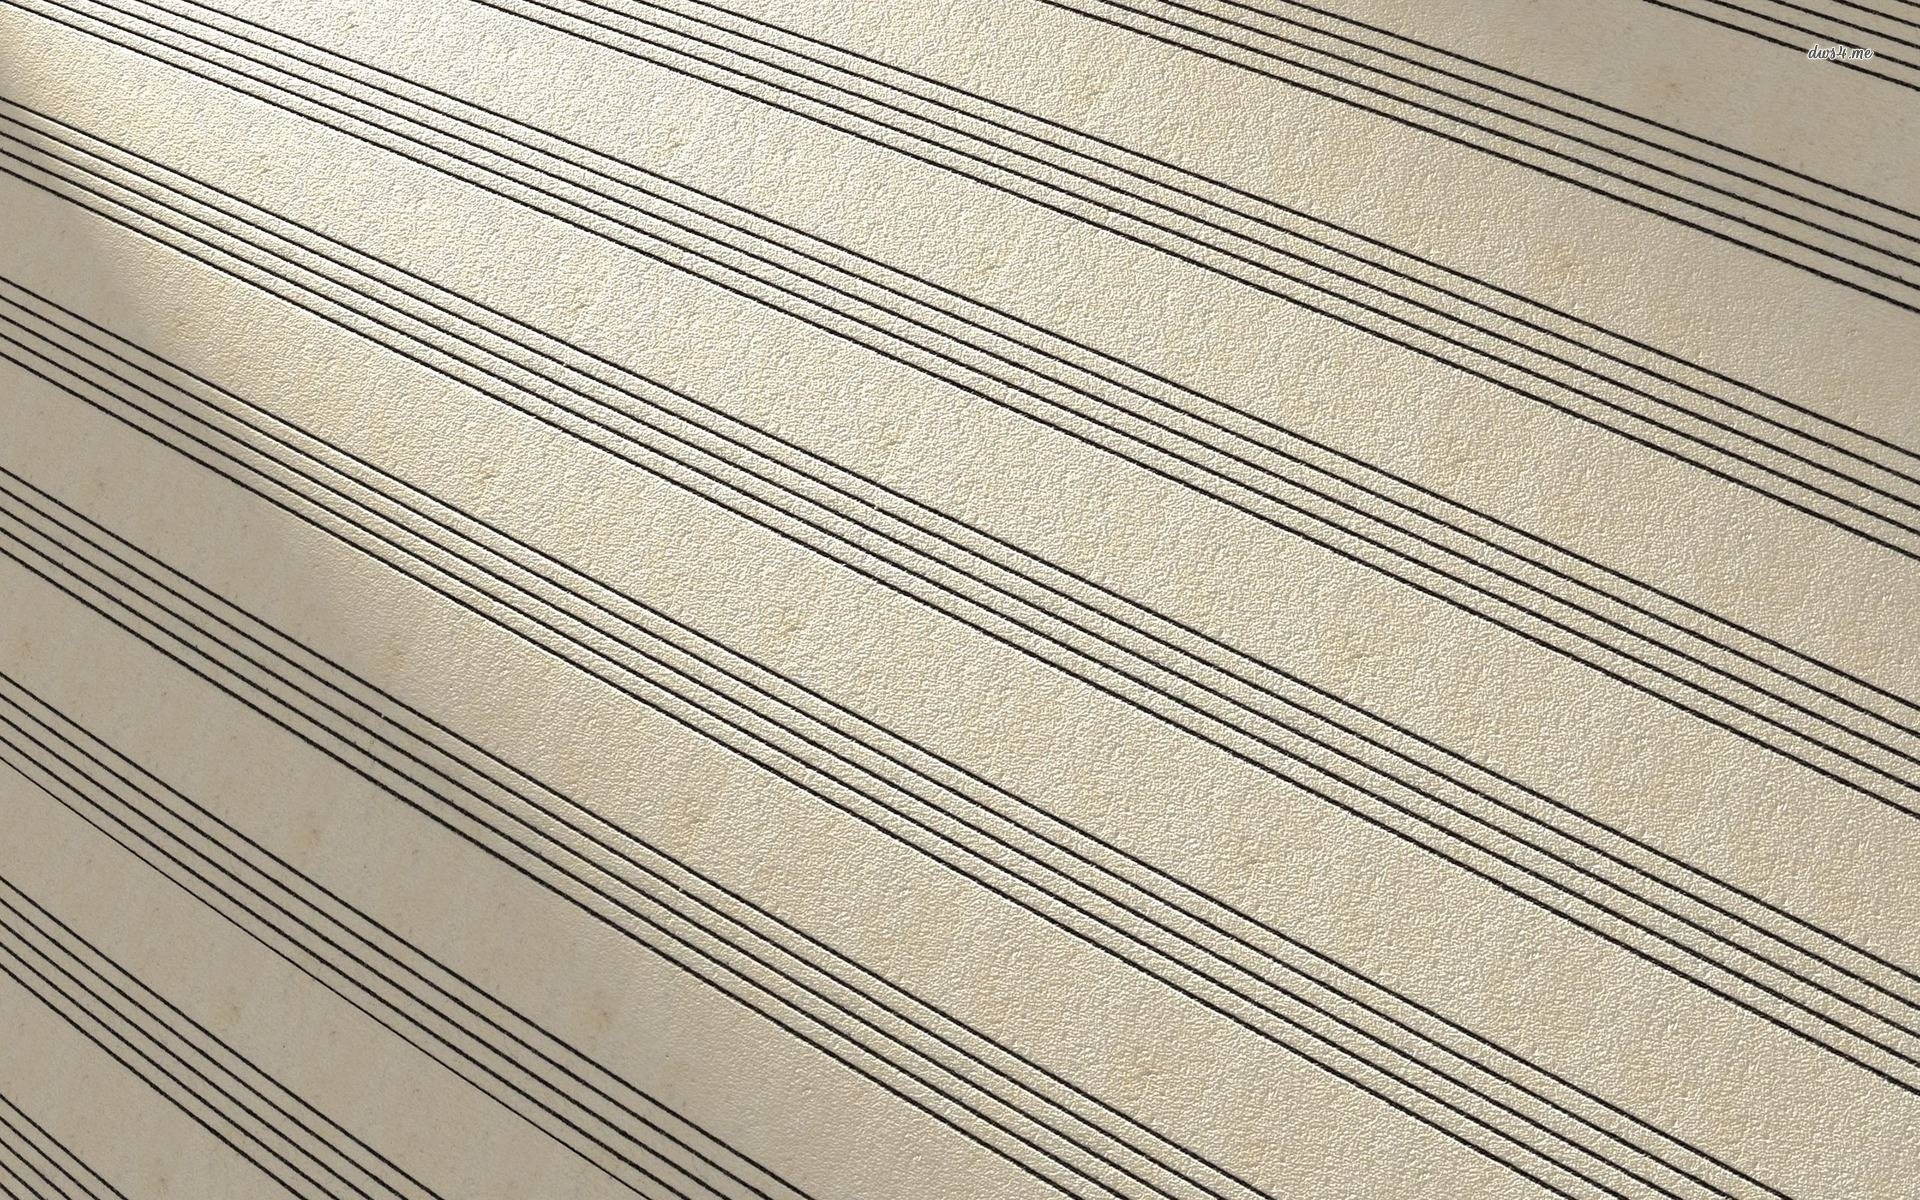 1920x1200  backgrounds-music-sheet-background-violin-powerpoint-wallpapers-hd  .